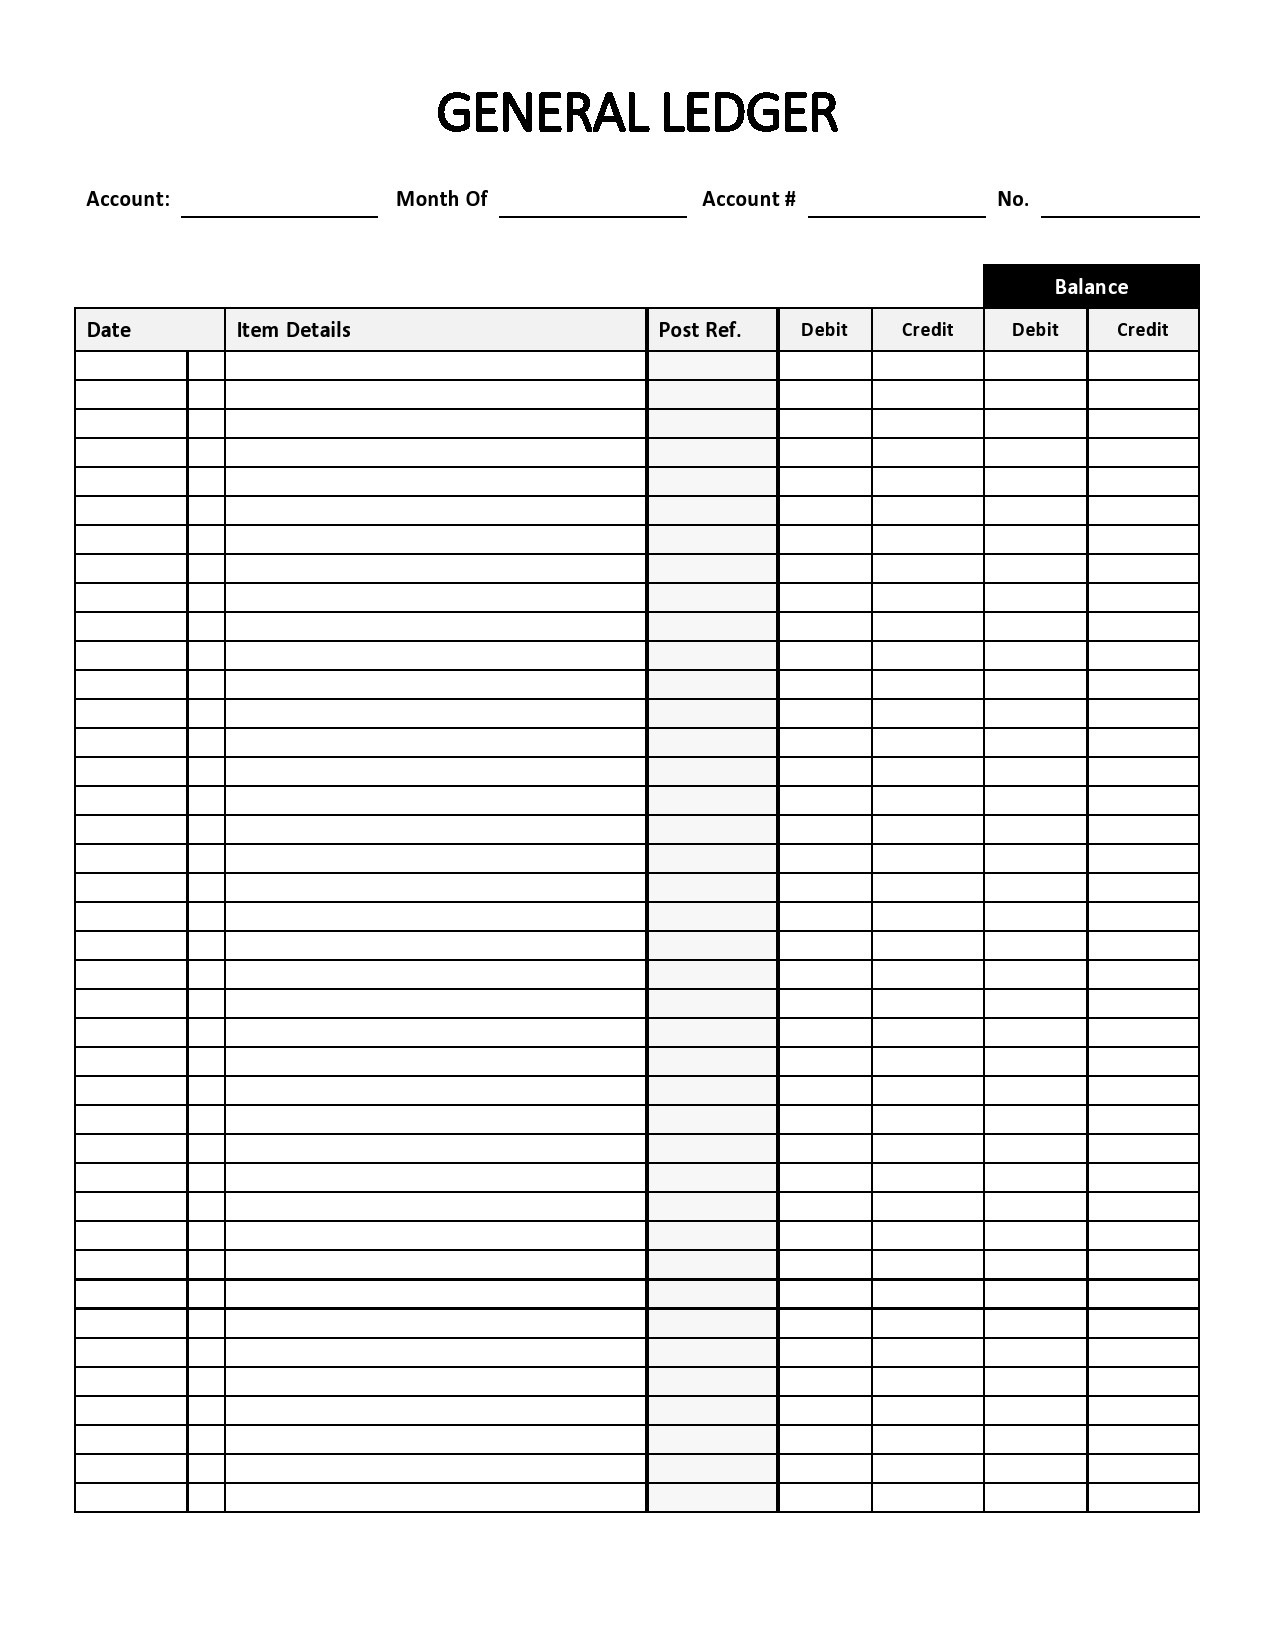 38 Perfect General Ledger Templates [Excel, Word] ᐅ TemplateLab